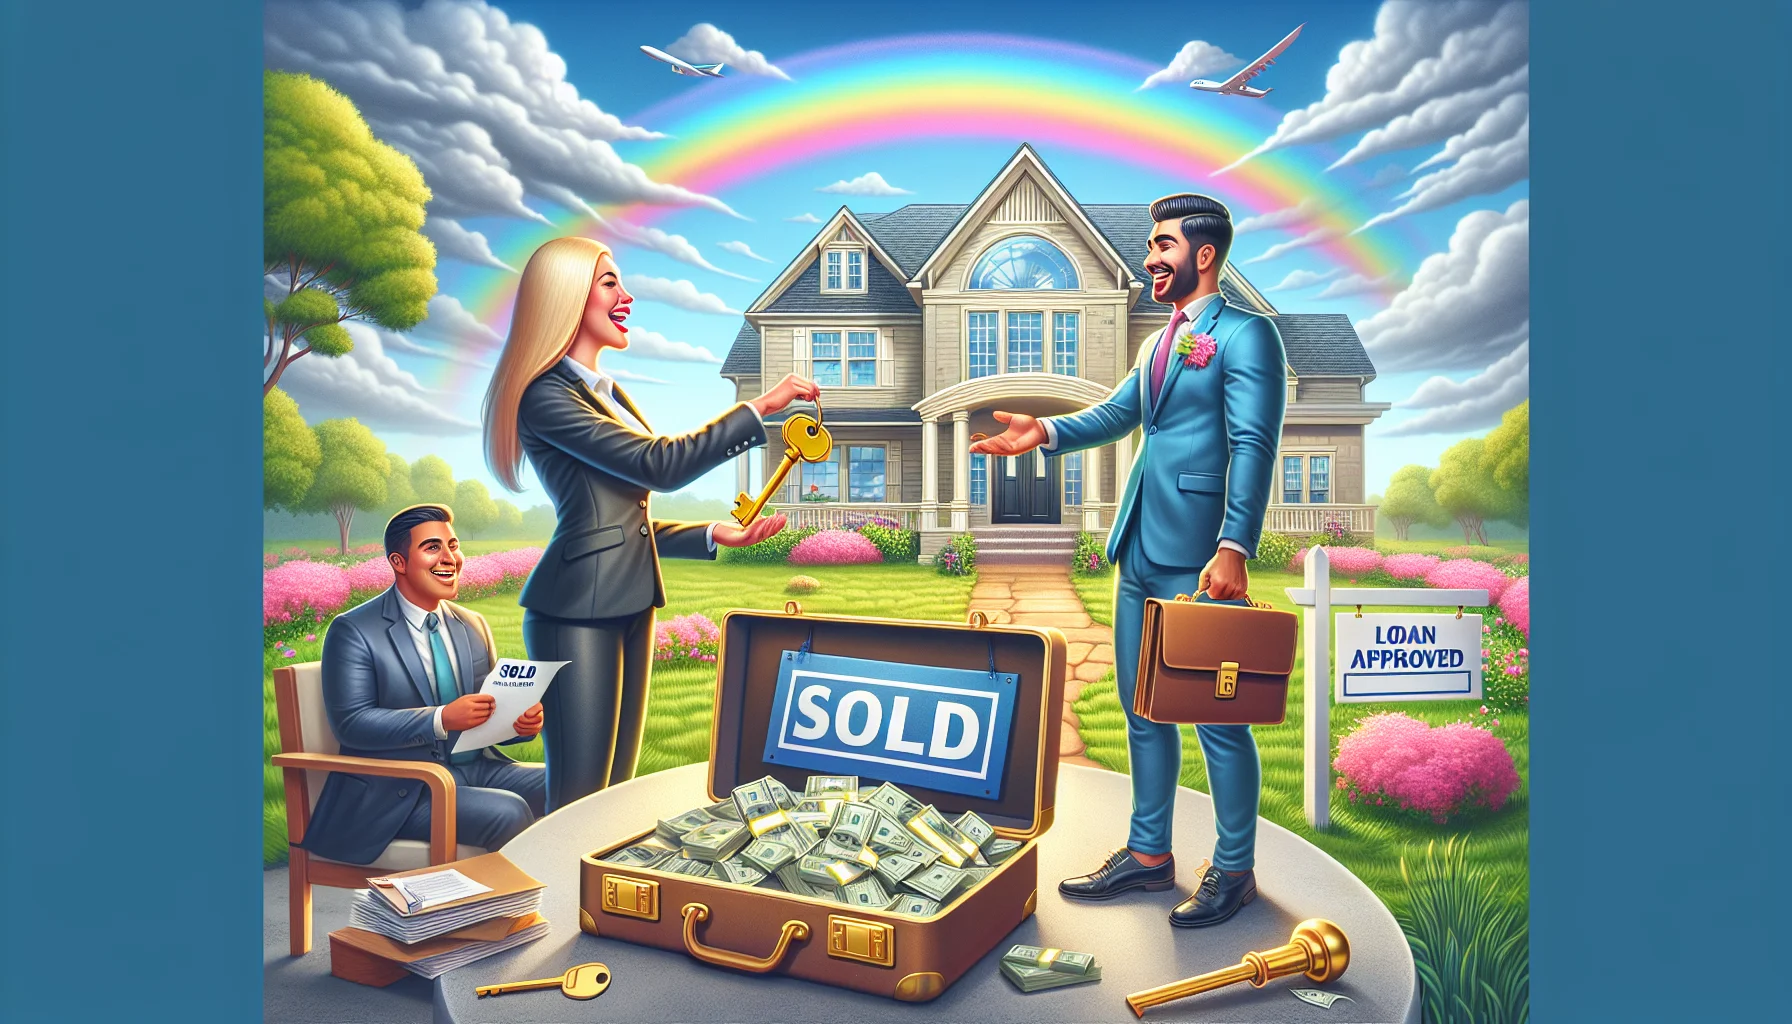 Imagine a whimsical and surreal scenario which embodies the perfection of conventional loan down payment assistance in real estate. Picture an ecstatic South Asian female real estate agent in a formal suit, handing over a gleaming golden key to a jubilant Hispanic male client. They are standing in front of a magnificent, well-designed house with a 'Sold' sign swinging in the garden. A rainbow arcardes over the house, while a briefcase overflowing with cash and documents marked 'Loan Approved' sits open on an adjacent table. Make it look as lively and realistic as possible.